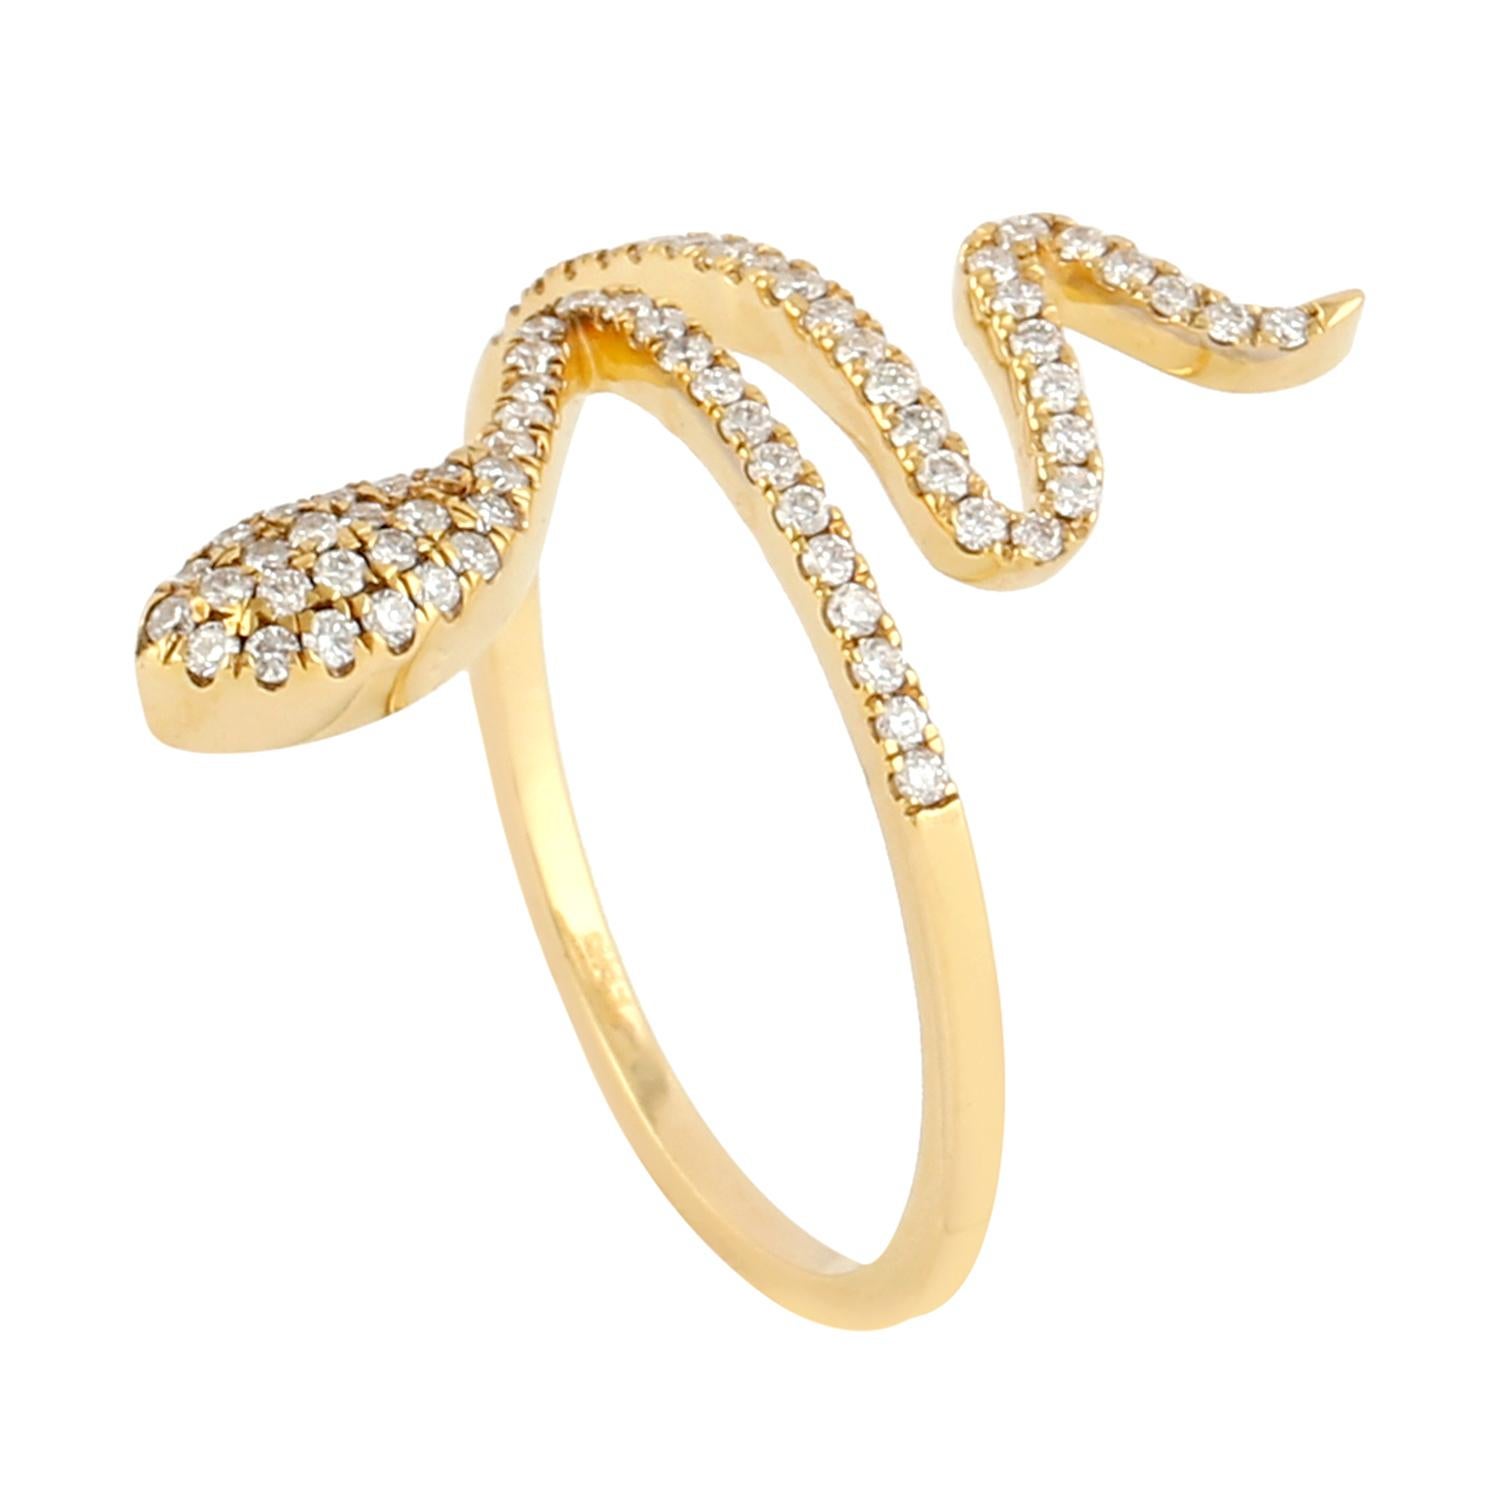 Mixed Cut Snake Shaped Ring With Pave Diamonds Made In 18k Yellow Gold For Sale